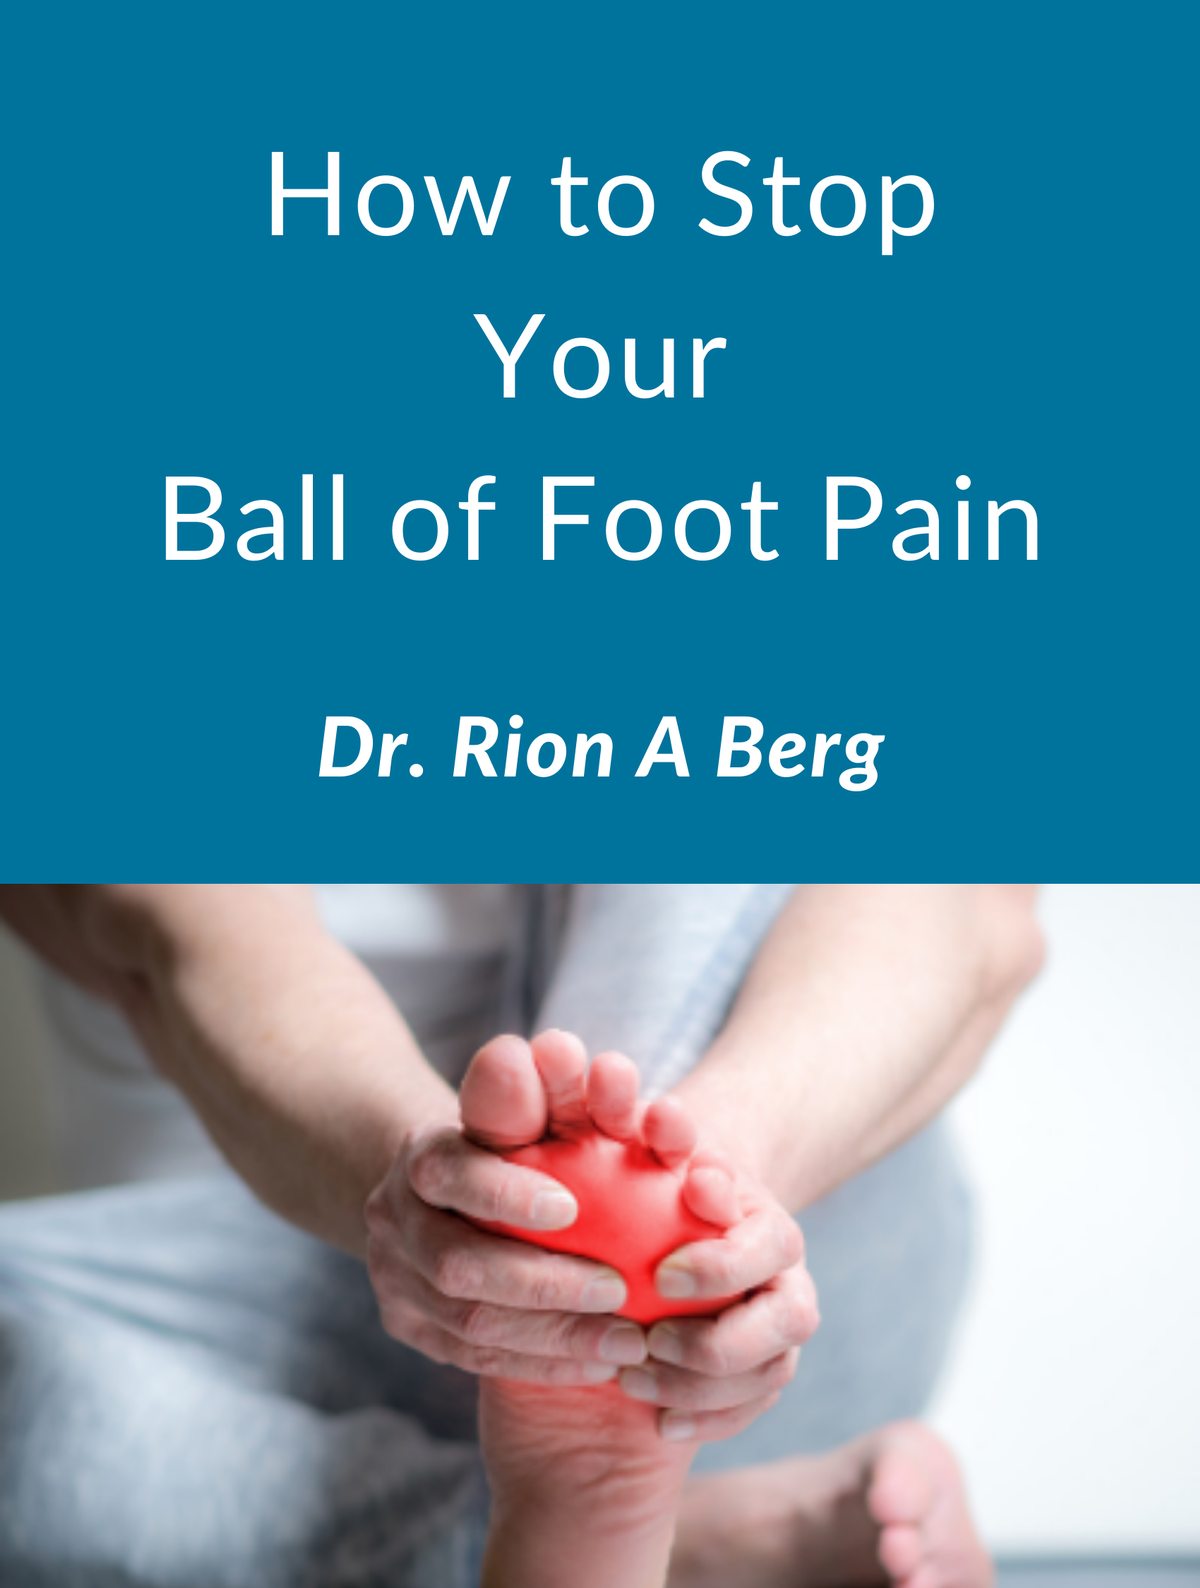 How To Stop Your Ball of Foot Pain in Seattle